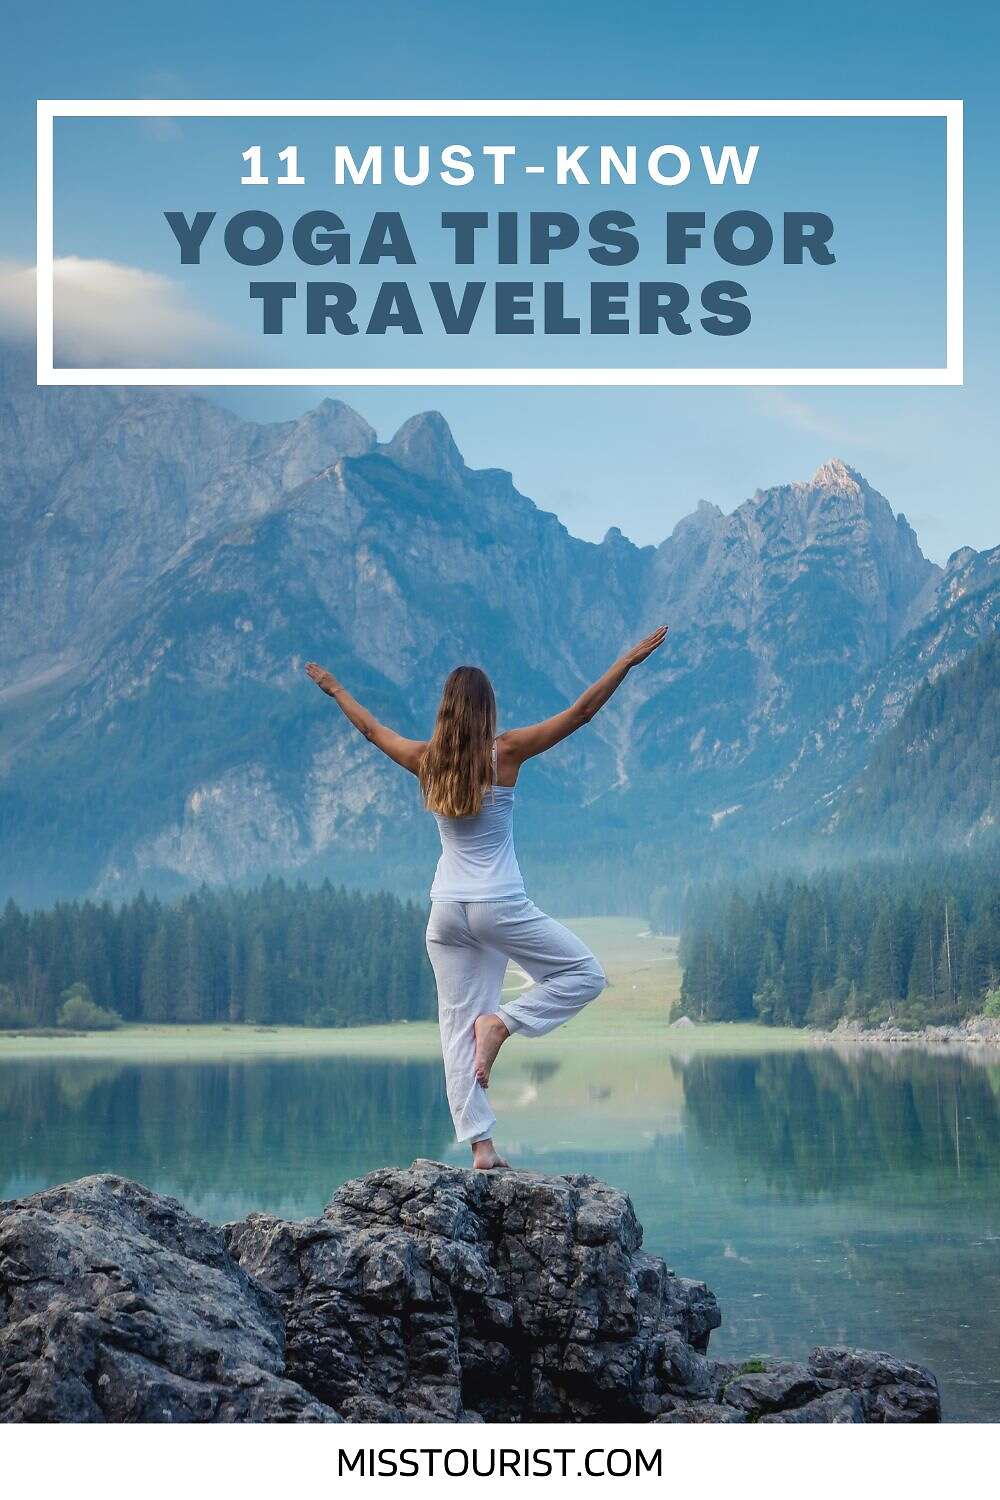 A person wearing white stands on a rock by a lake, performing a yoga pose. Mountains and trees are in the background. Text reads "11 Must-Know Yoga Tips for Travelers" with "misstourist.com" at the bottom.